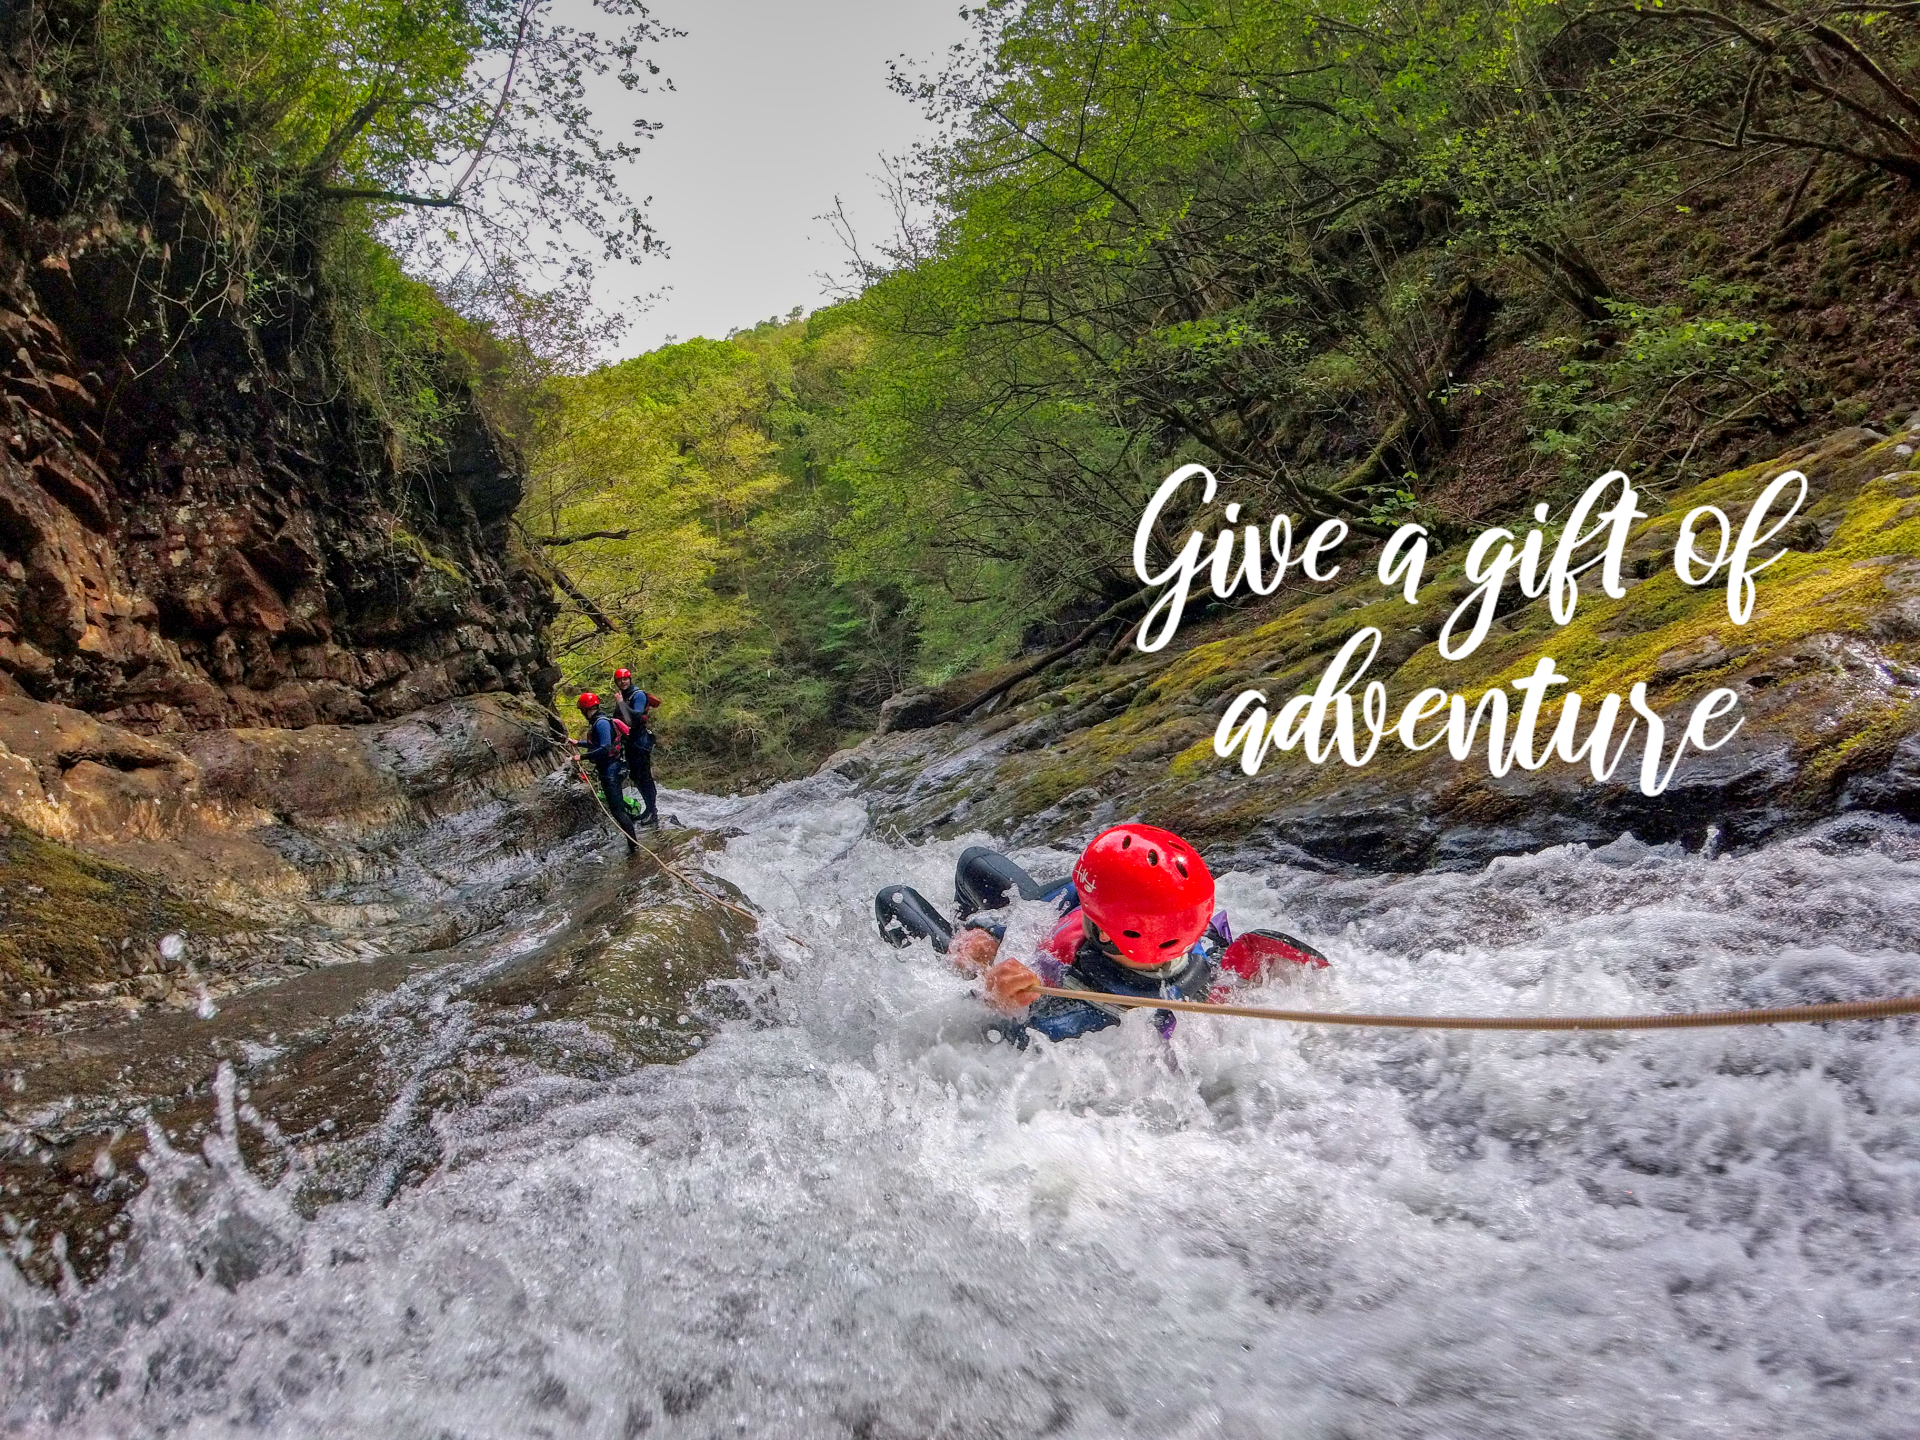 Canyoning Activity Gift Voucher